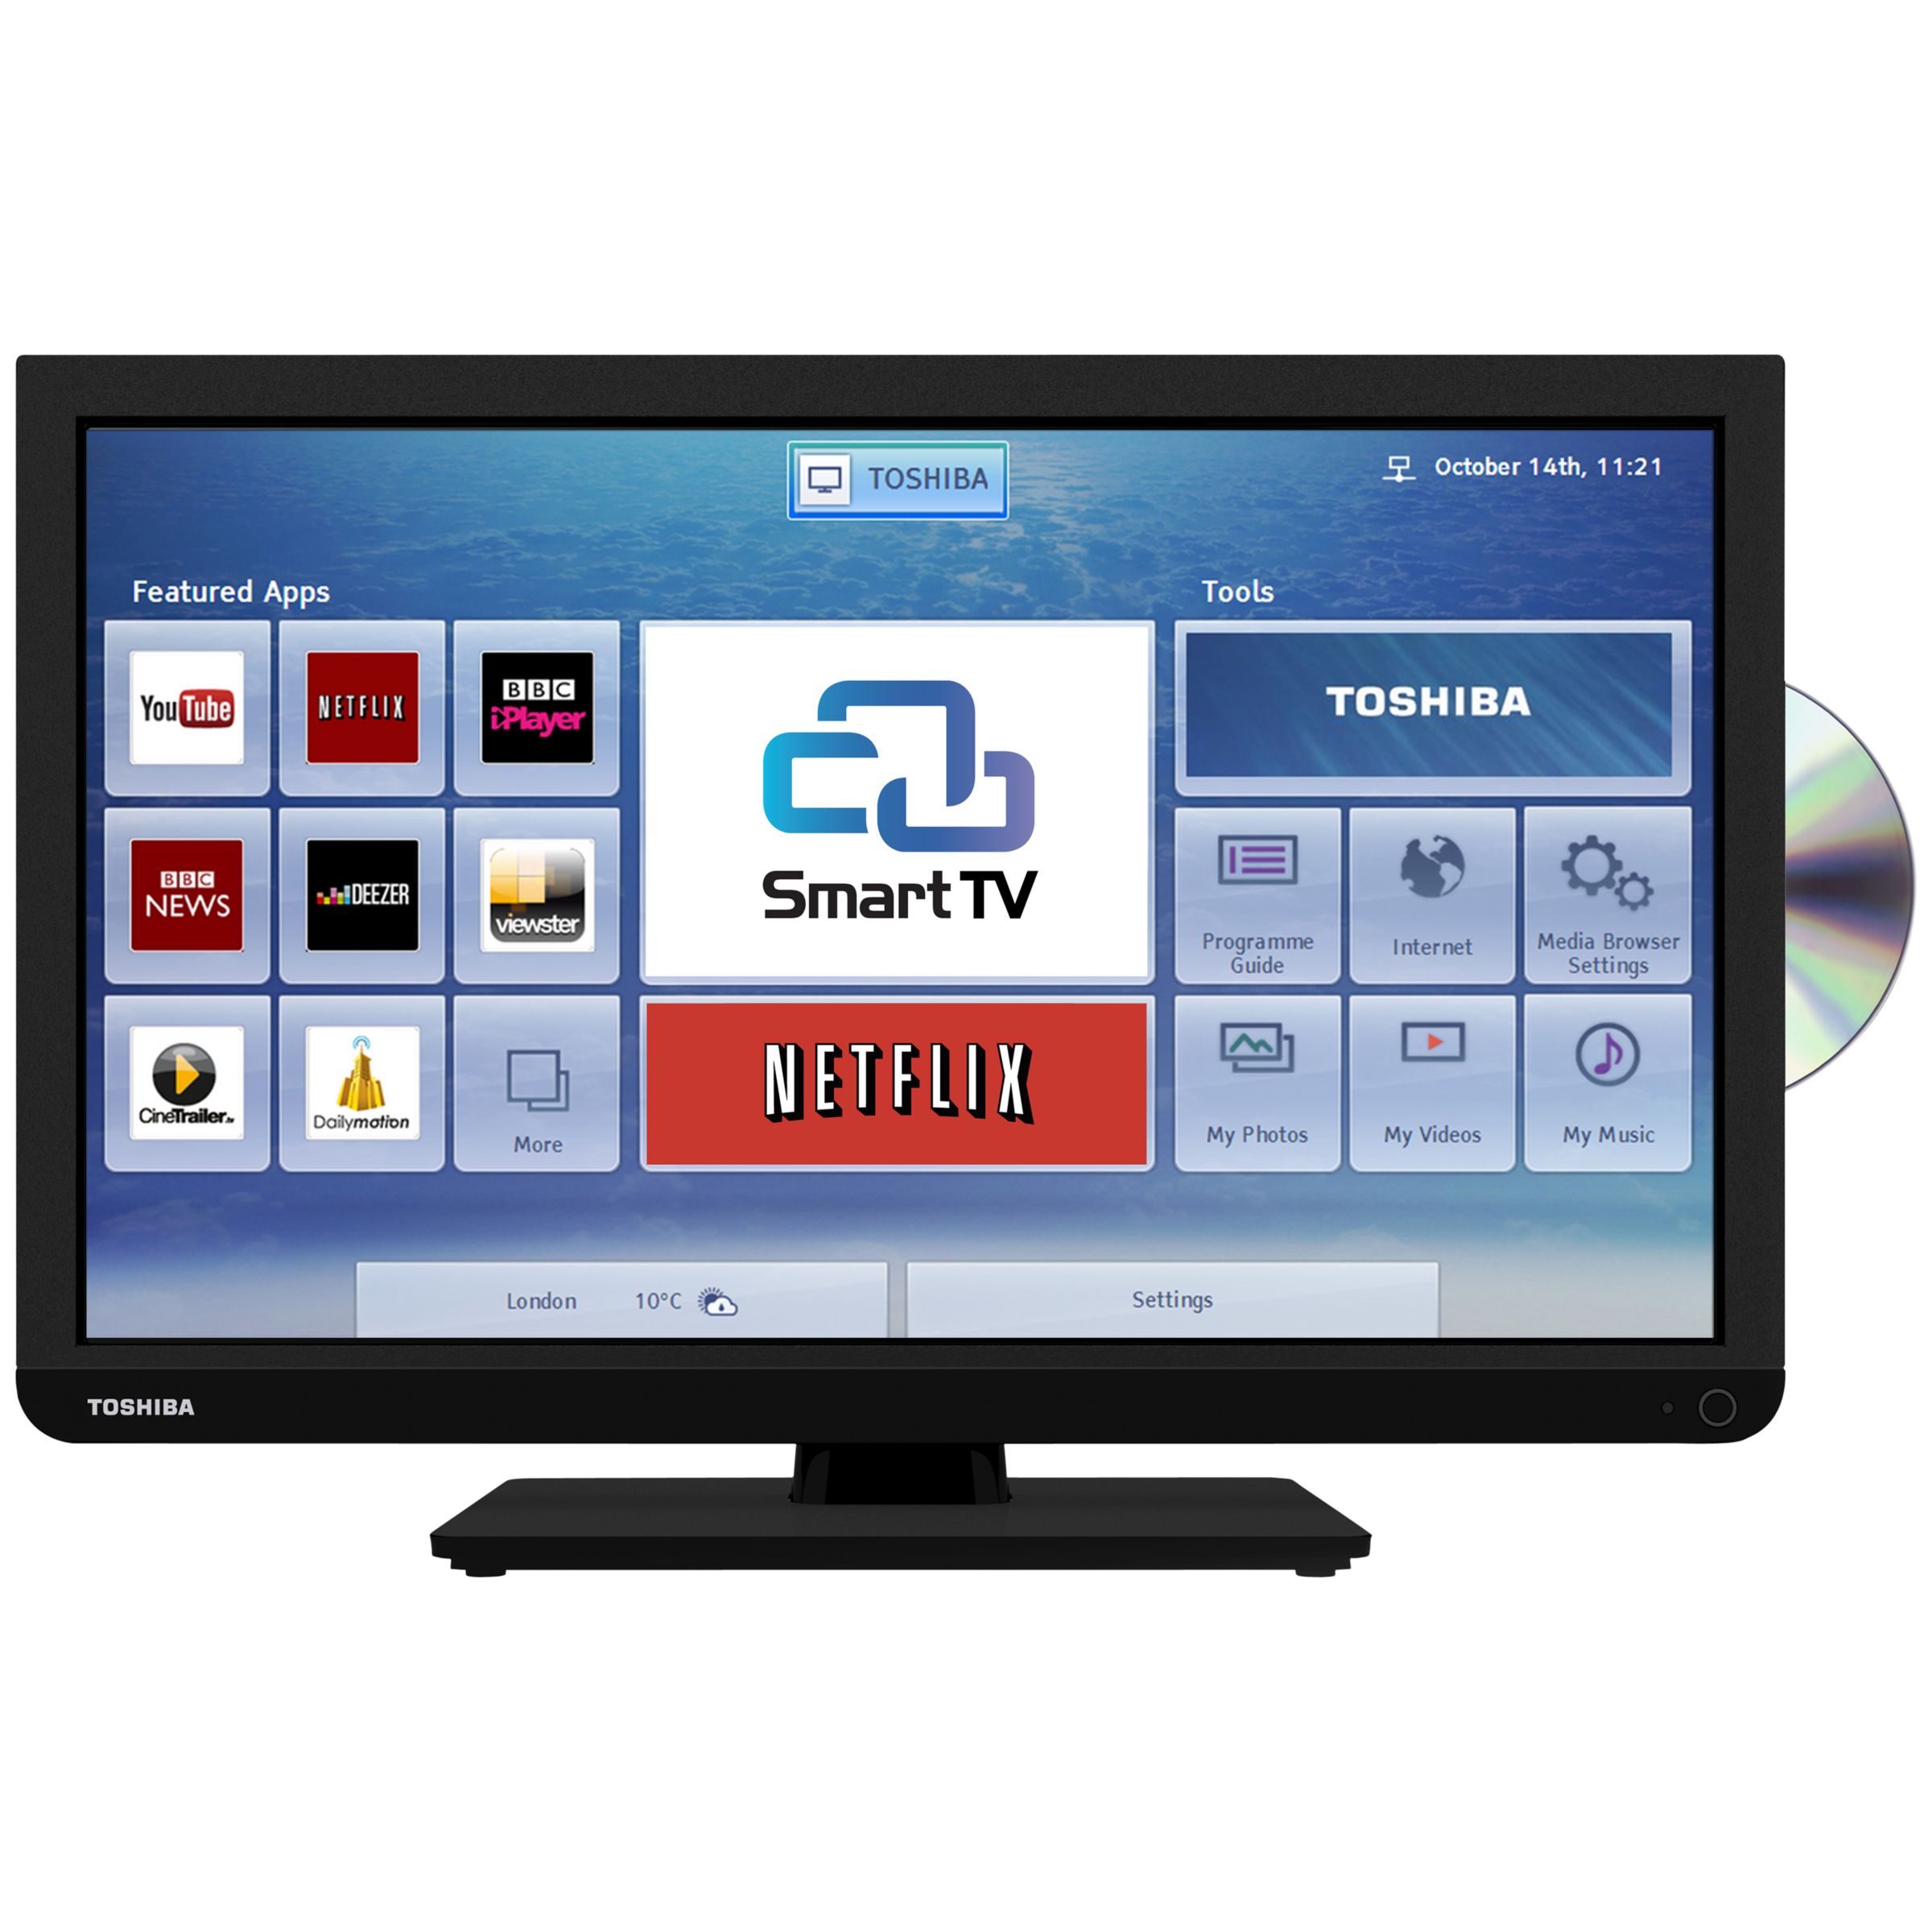 Toshiba 24d343 Led Hd Ready Smart Tv Dvd Combi Wi Fi 24 With Freeview At John Lewis Partners